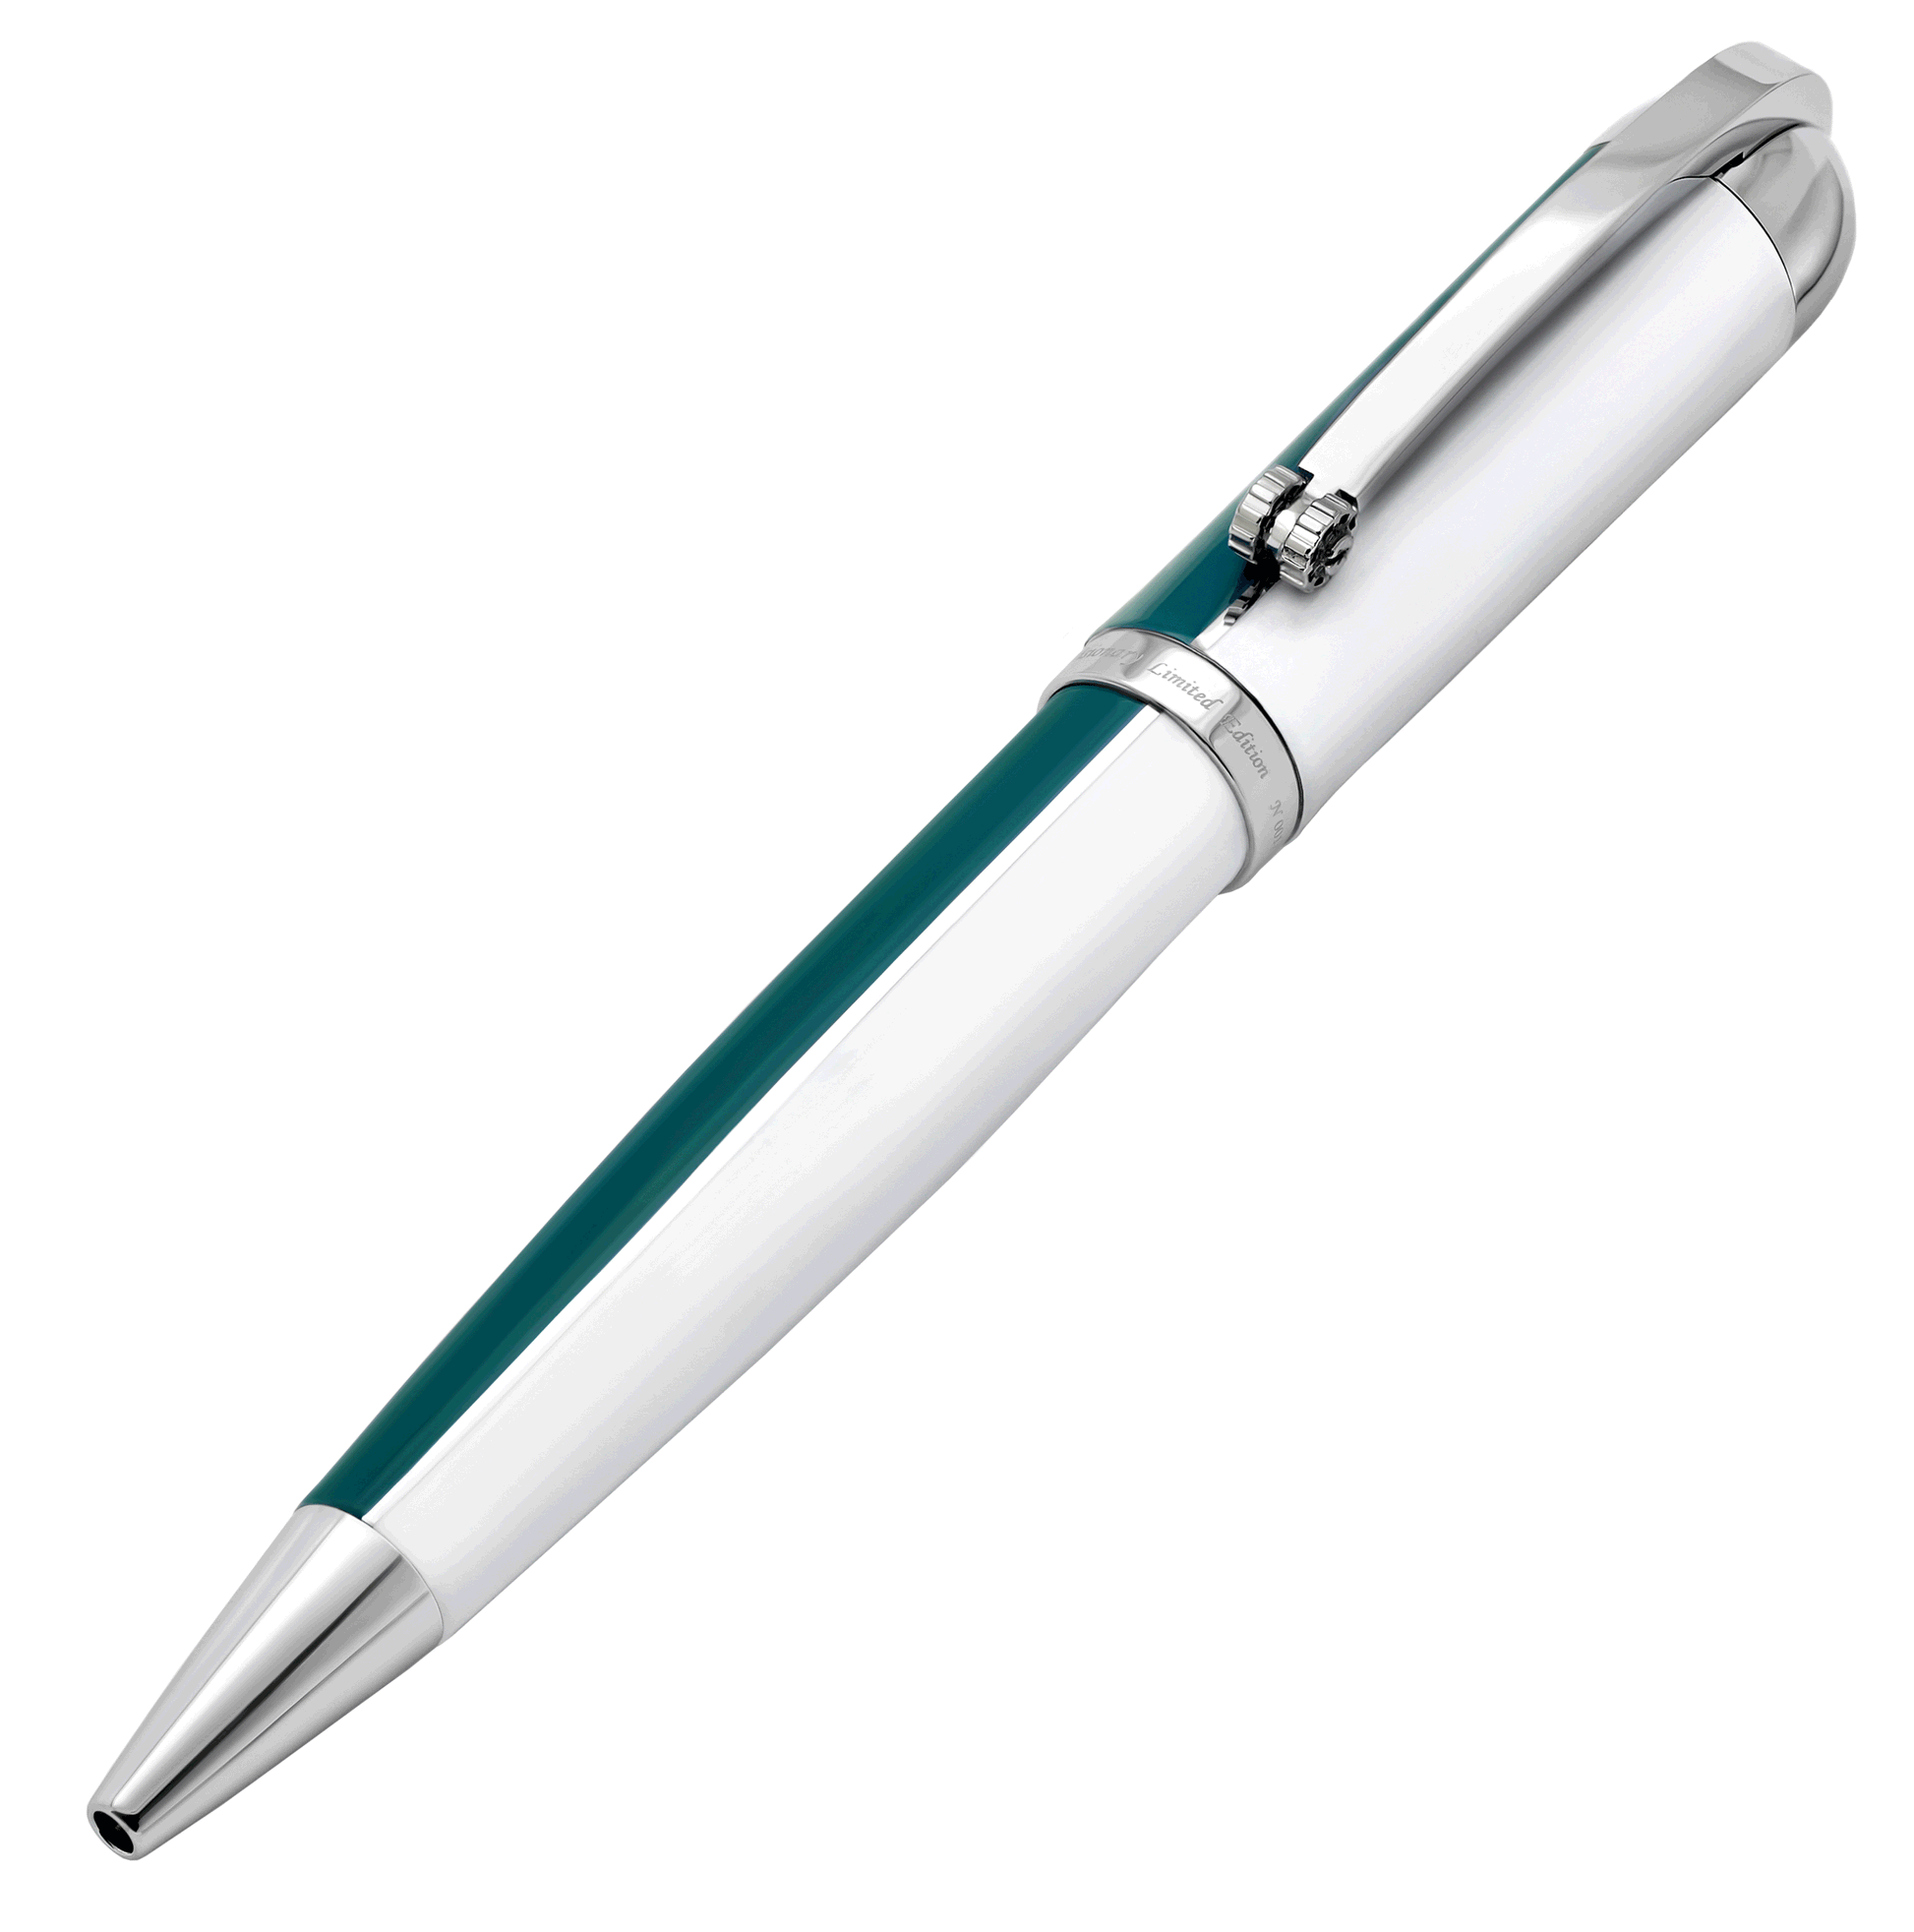 Xezo - Angled 3D view of the front of the Visionary Teal Green/White B Ballpoint pen